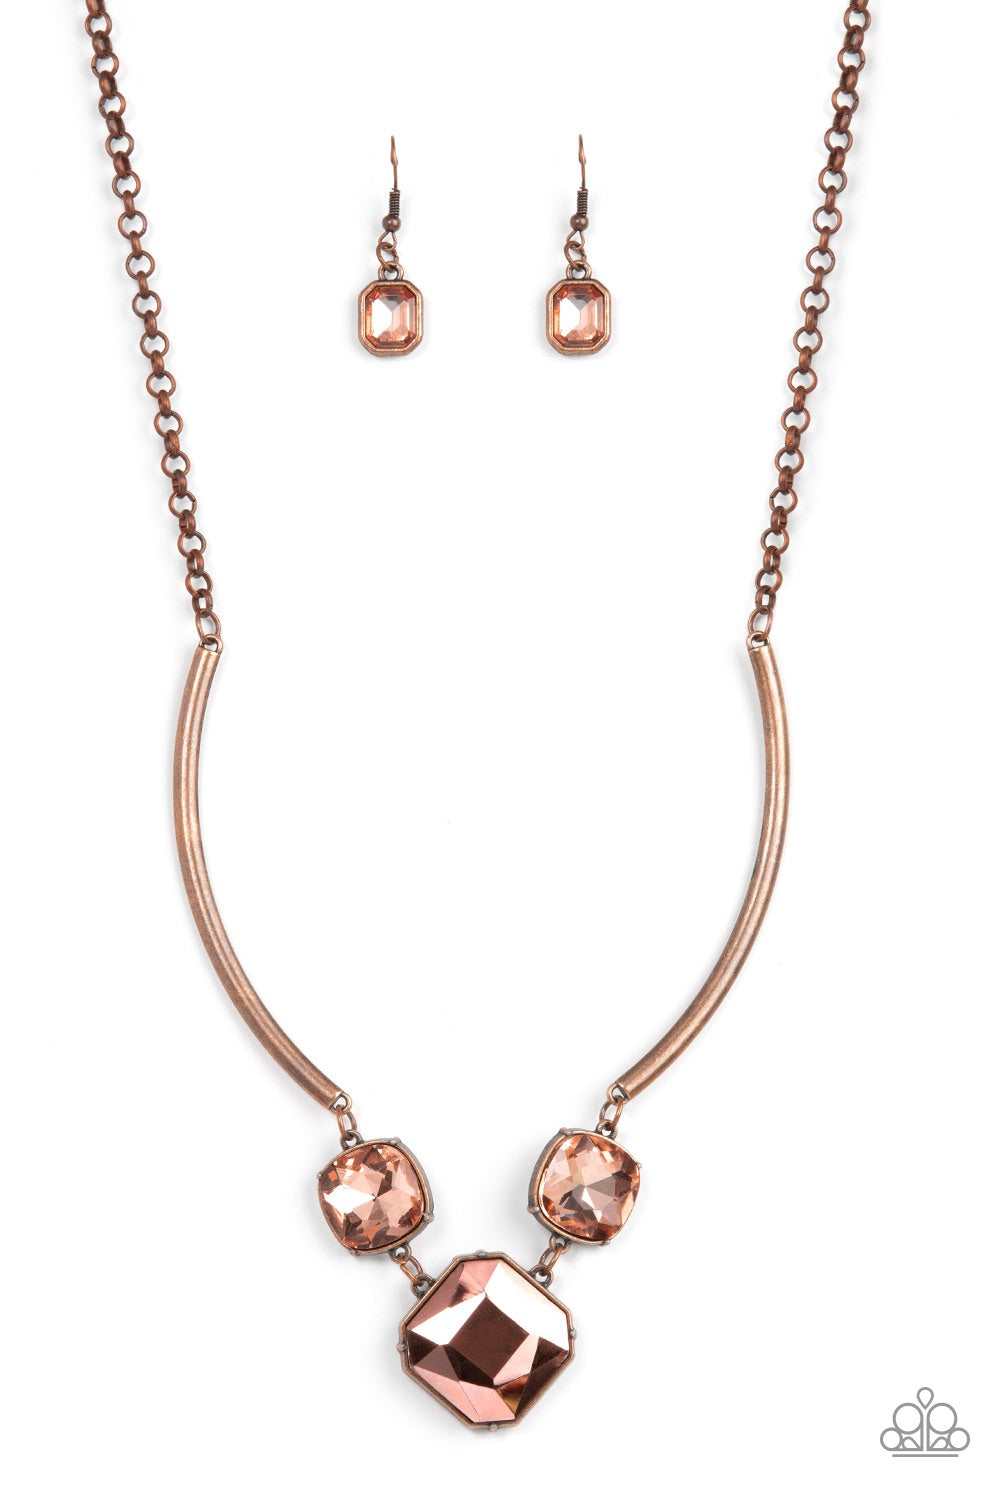 A Finishing Touch Jewelry Paparazzi Divine Iridescence - Copper Necklace